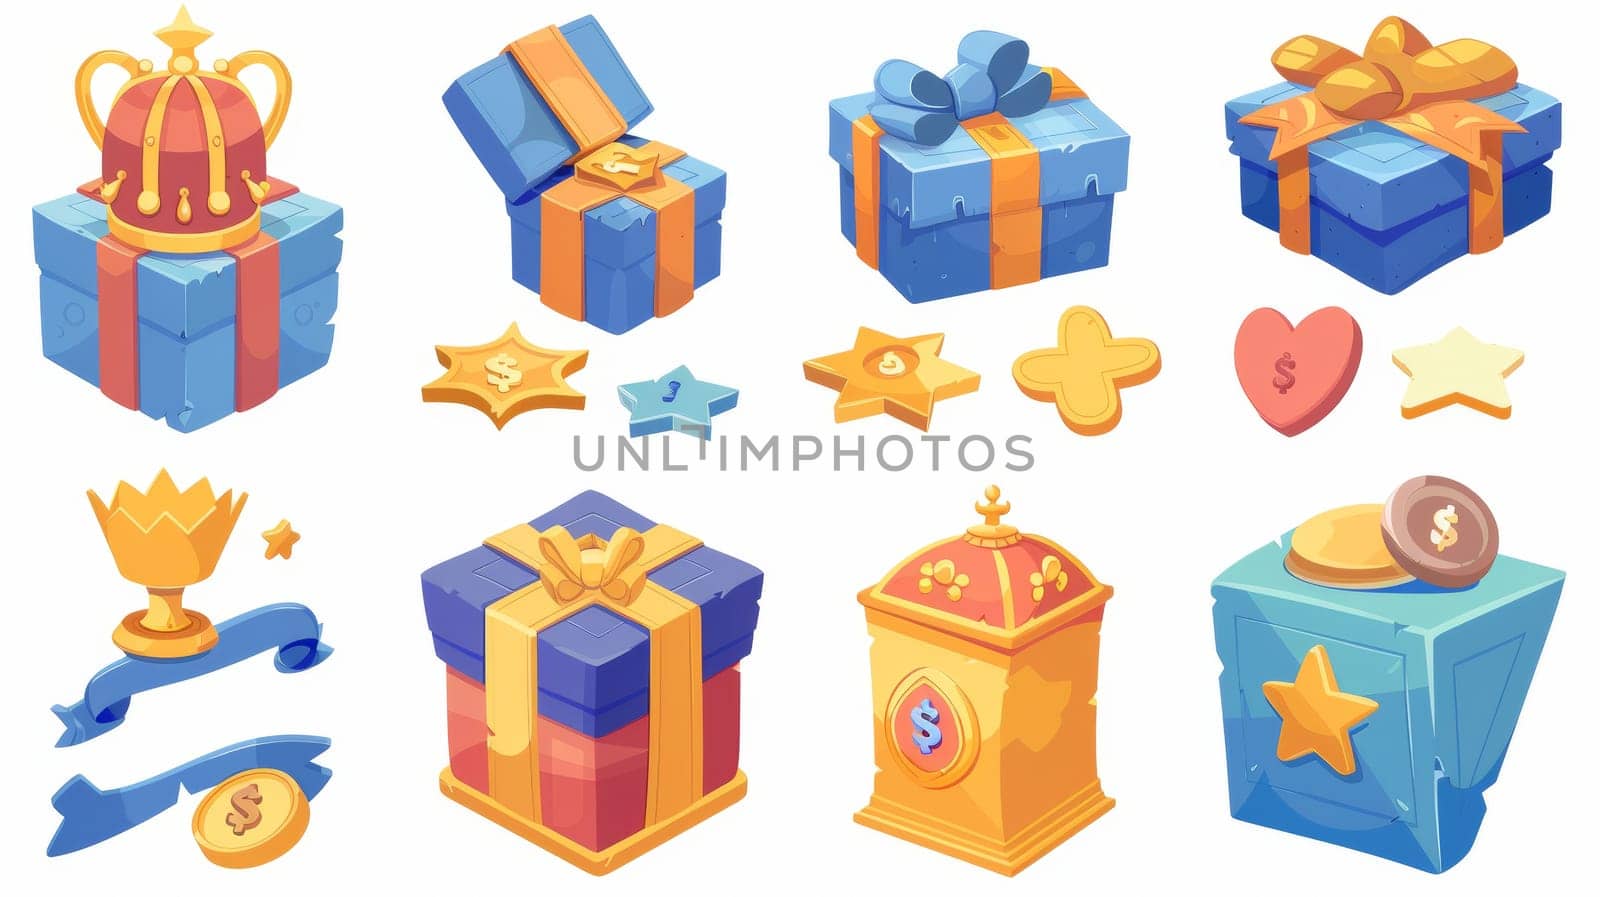 Isolated Cartoon icons set with bonus, coins, bills, crown, star, gold coins, and royal seal. Packs with blue wrapping paper and bows. Game, draw, surprise, money award isolated cartoon icons.